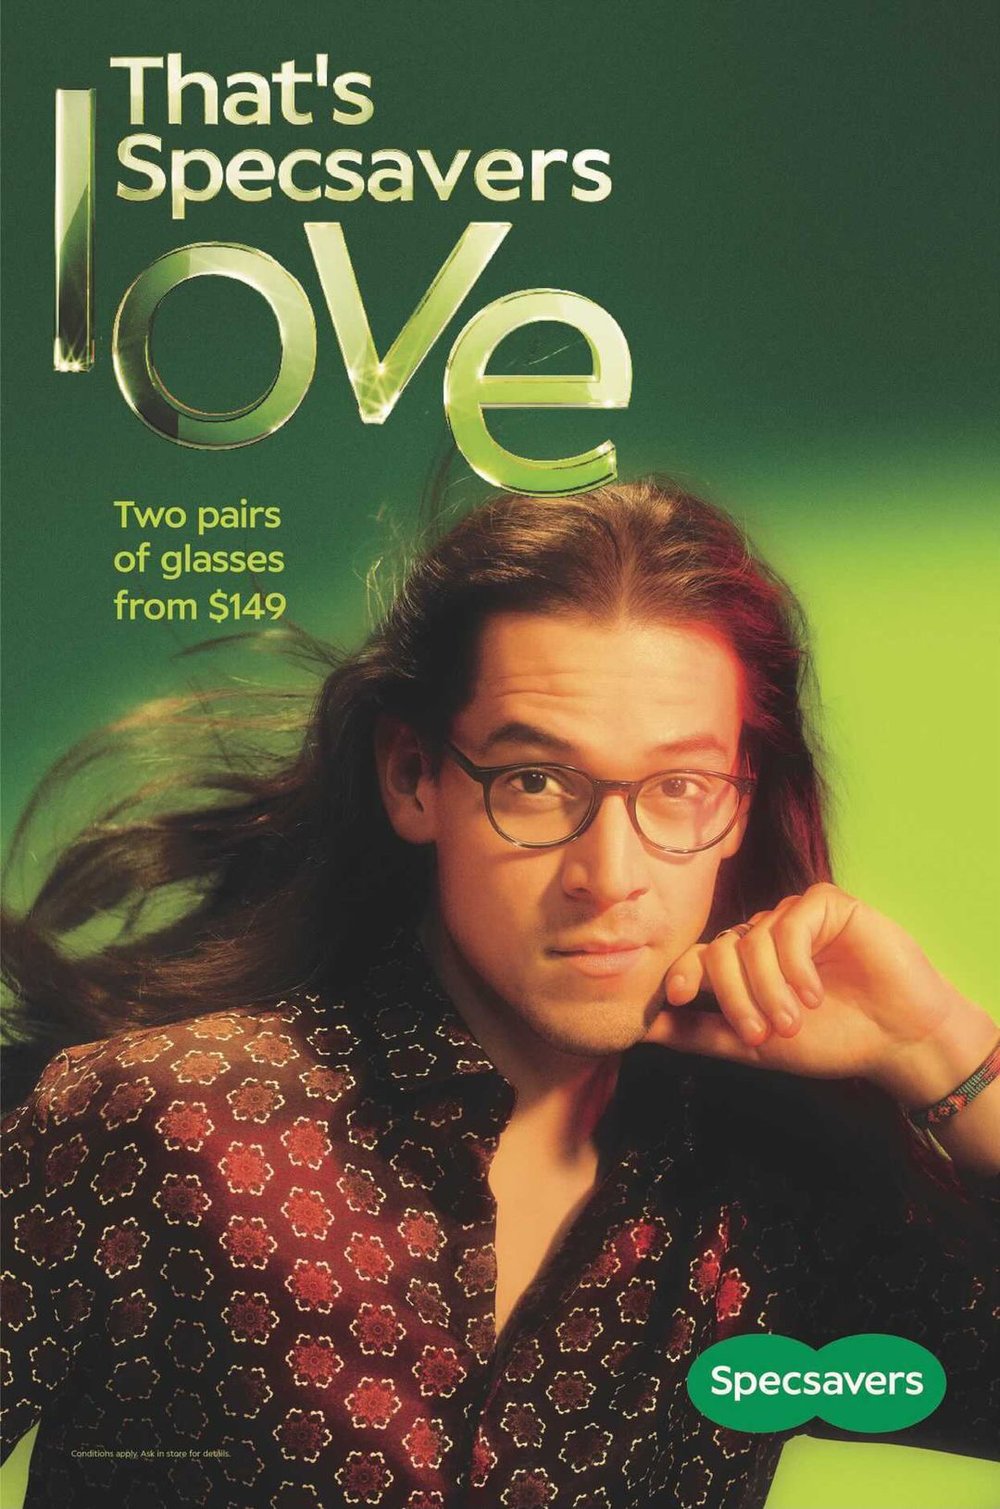 Ricky-Lee for Specsavers — Supernaturals Modelling